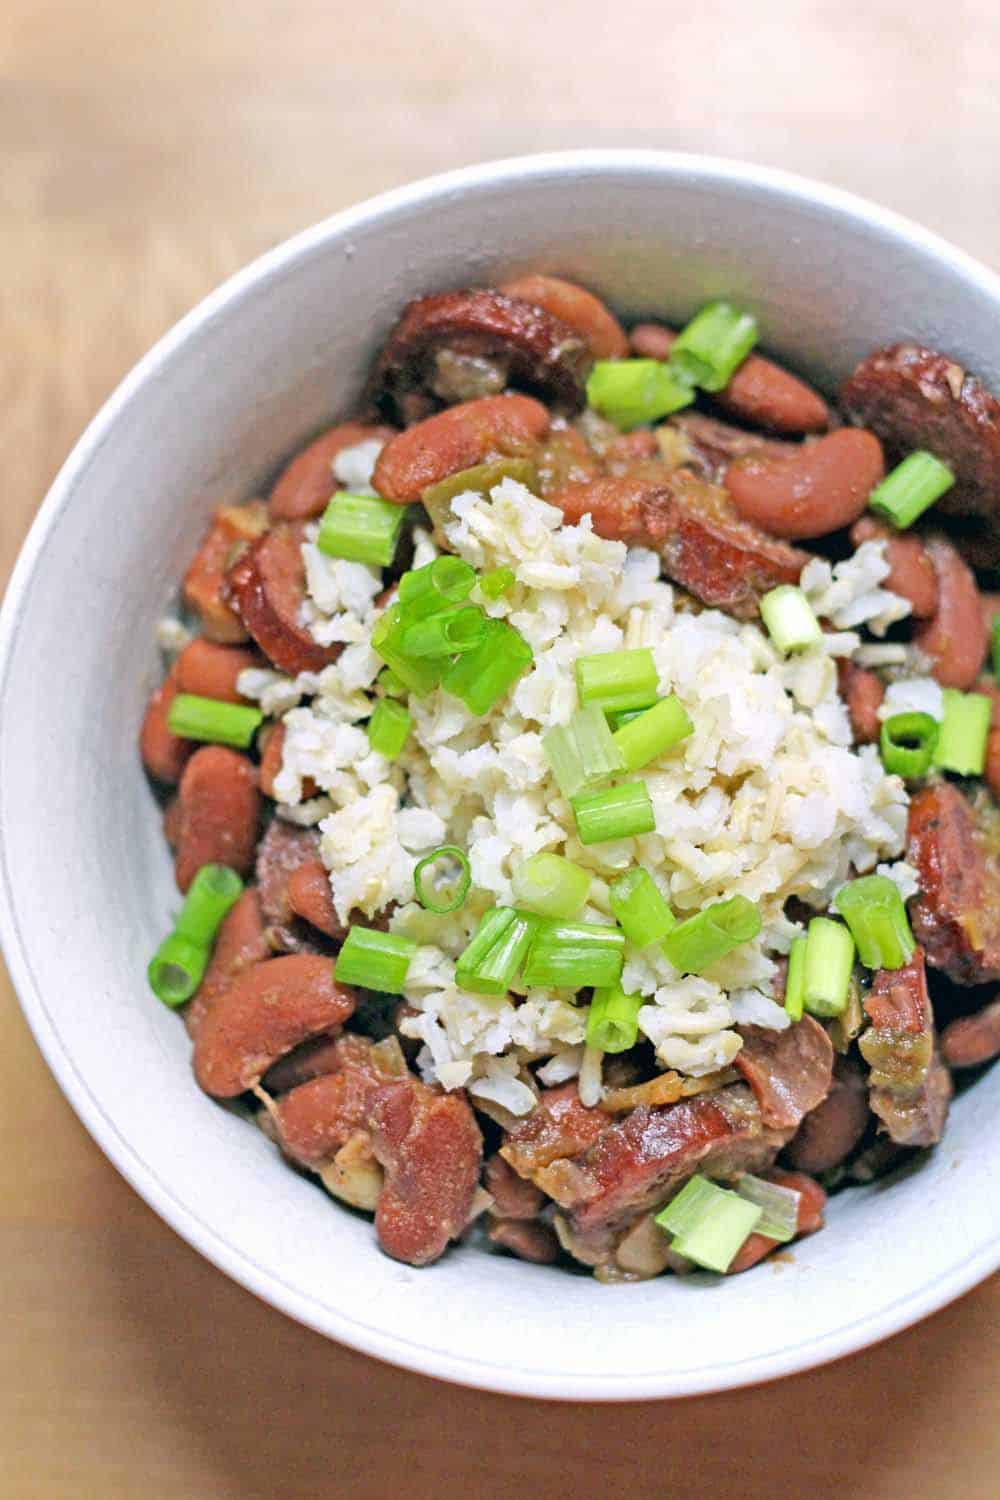 Perfectly creamy, smoky, and savory, these slow cooked red beans taste just like you'd find in New Orleans and are inexpensive and easy to make!